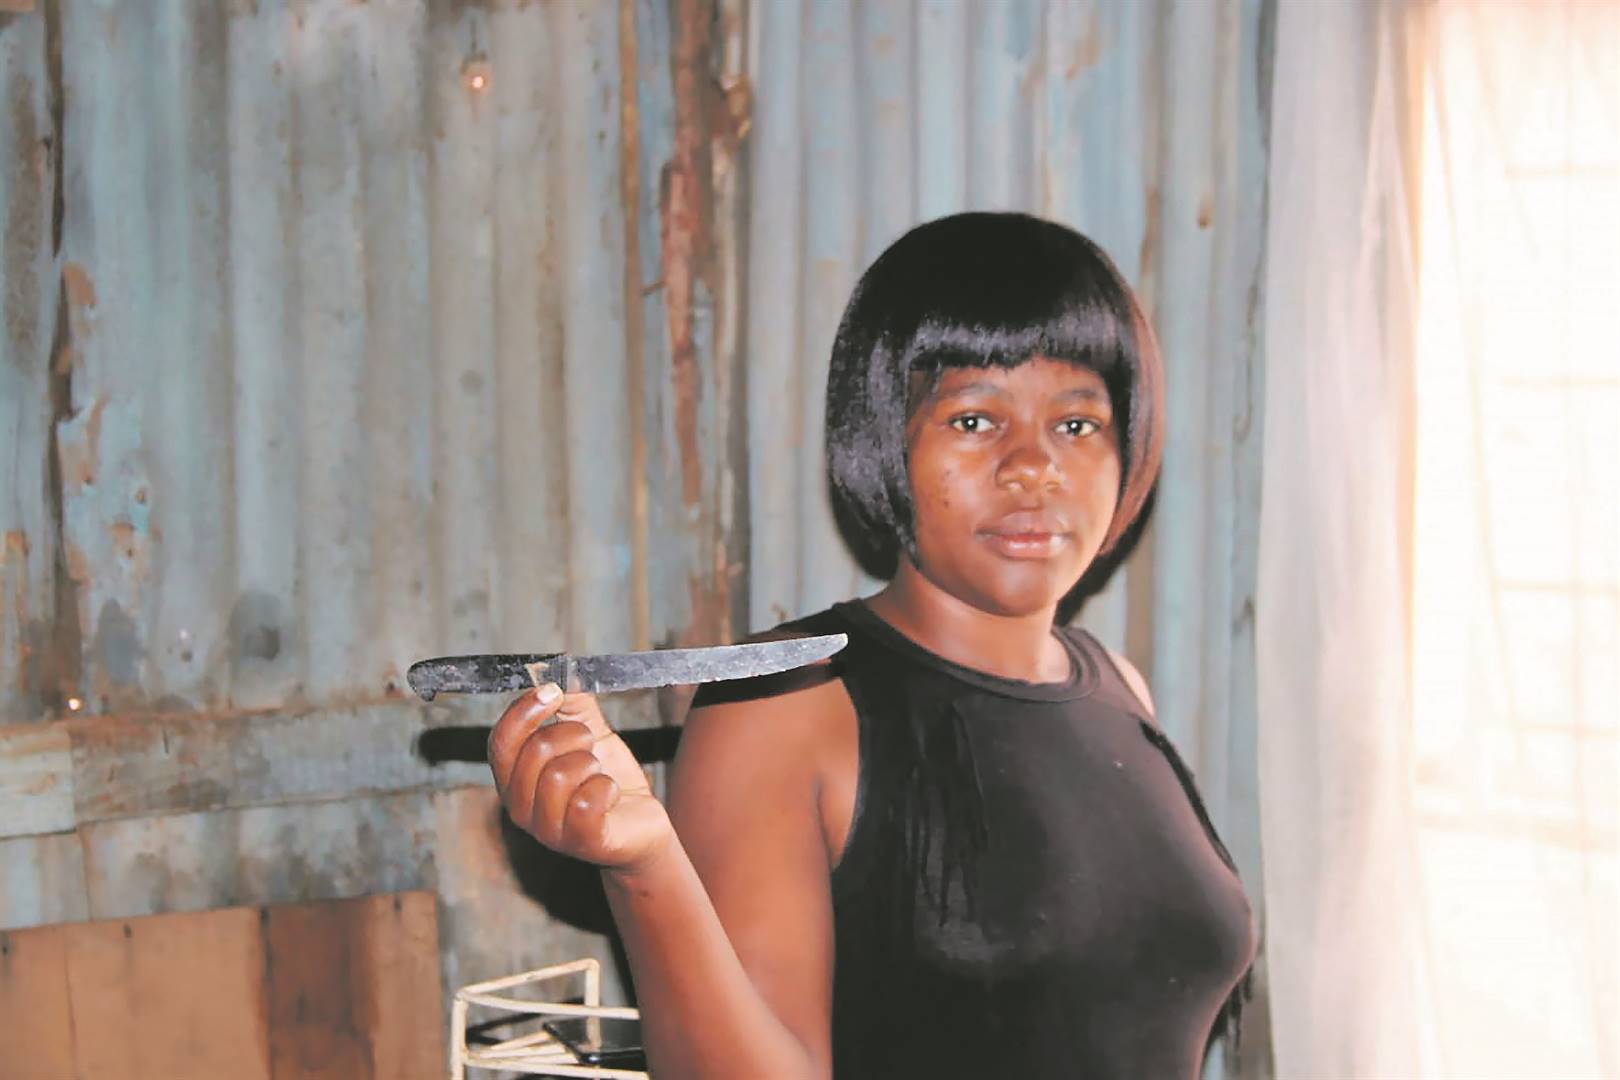 Smangele Dladla holds a knife believed to have been used in the murder of her uncle.     Photo by      Phineas Khoza